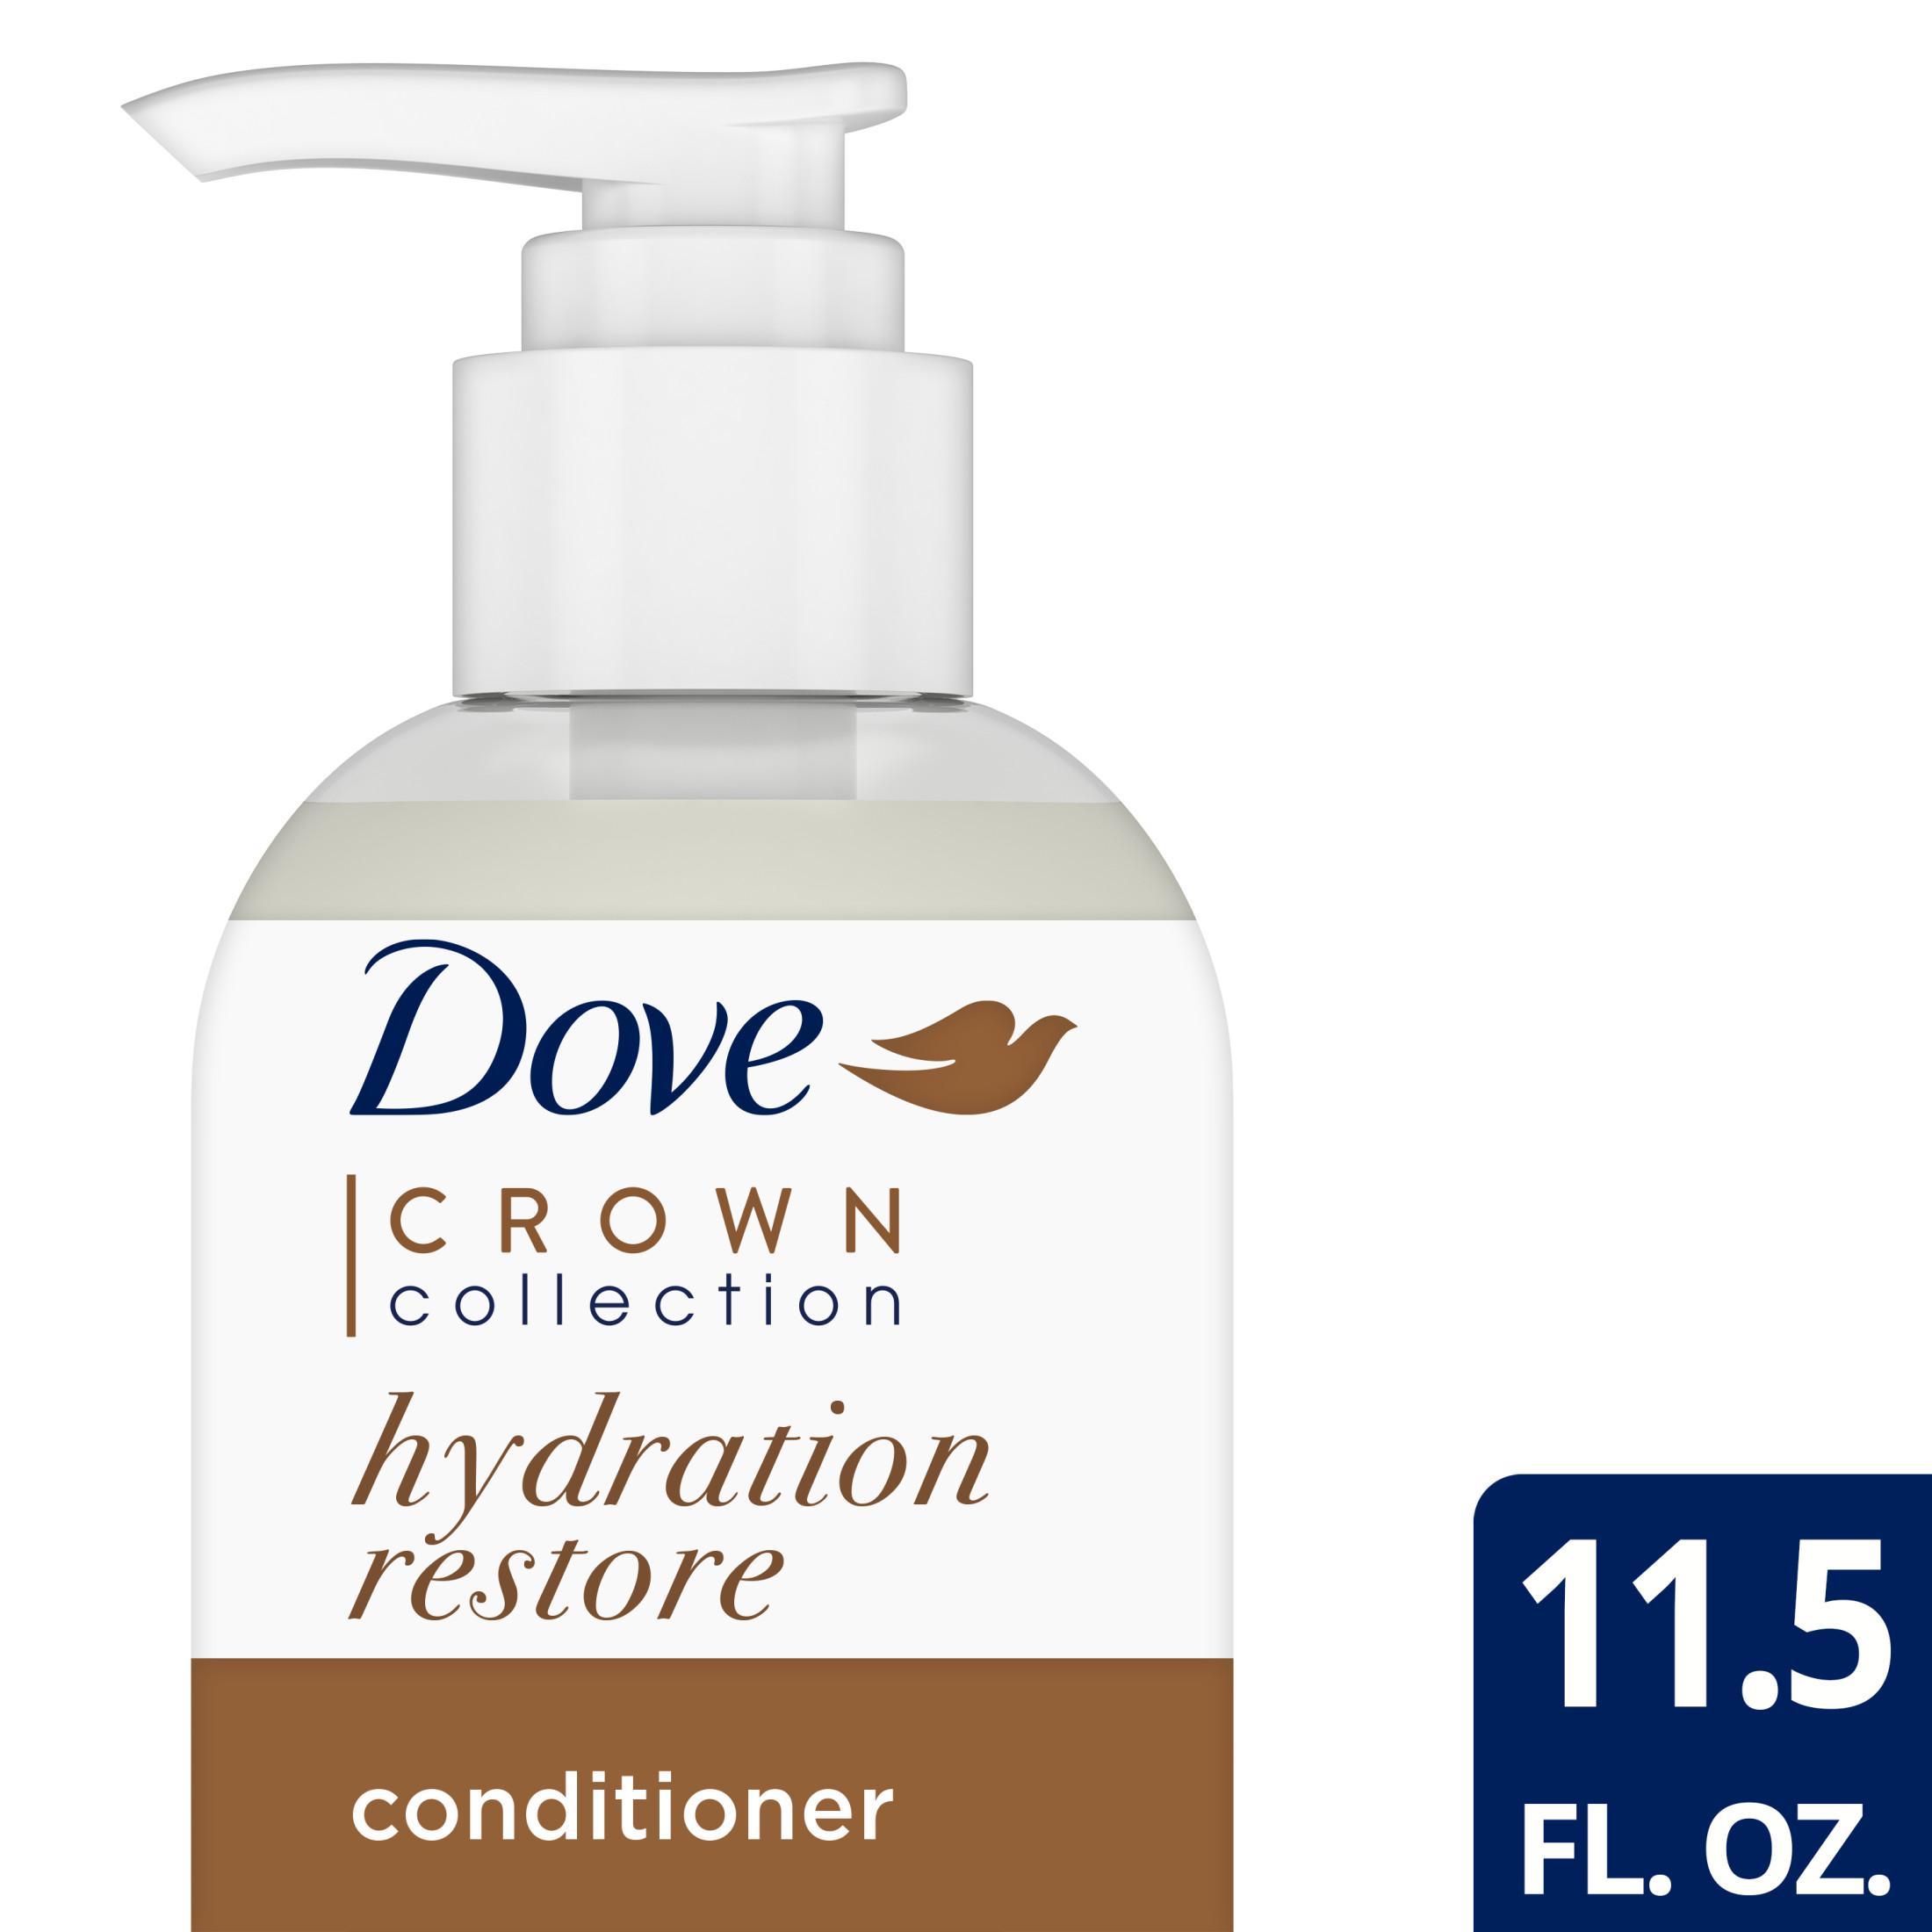 Dove Crown Collection Hydration Restore Detanglers for Curly Hair with Coconut Oil, 11.5 fl oz - image 3 of 10